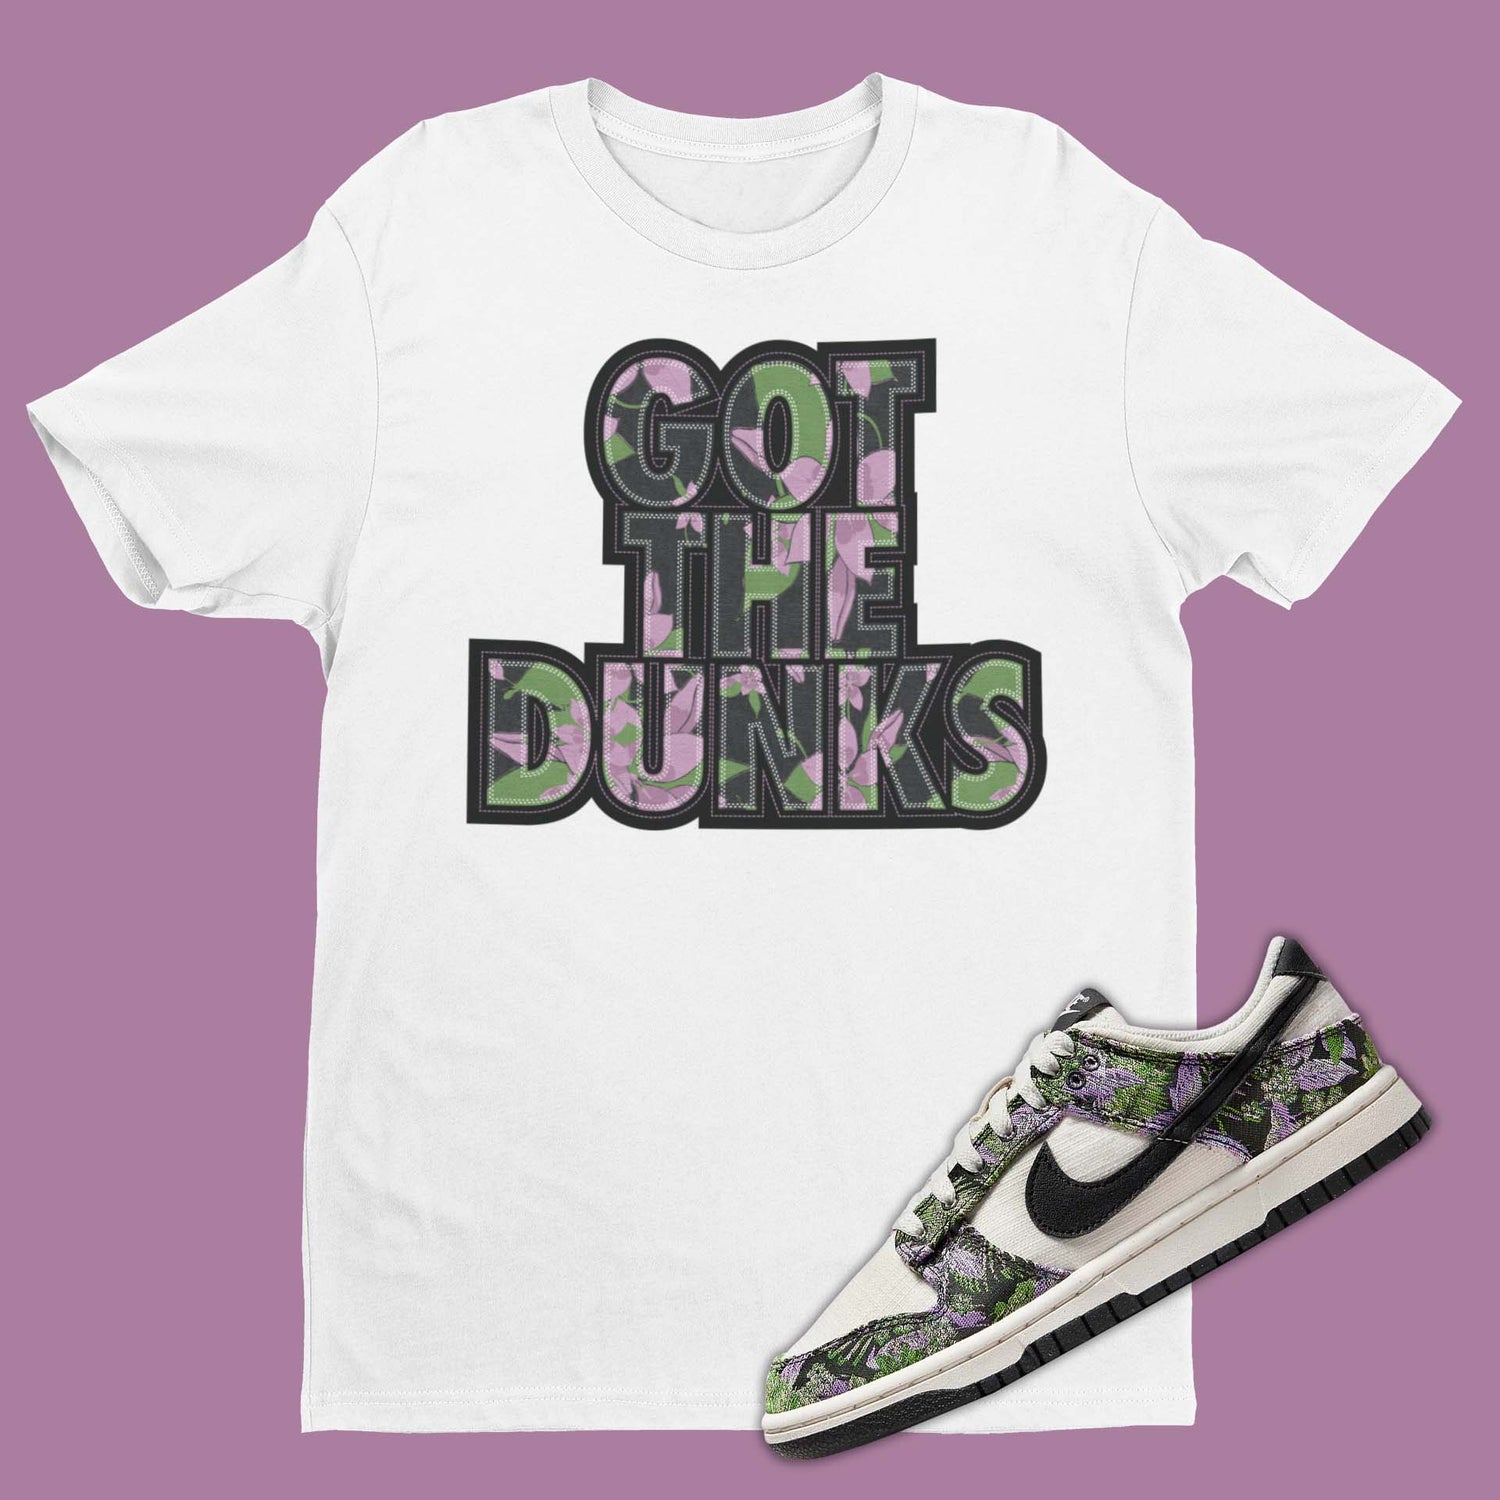 Stay stylish with the Got The Dunks Nike Dunk Low Floral Tapestry Matching T-Shirt from SNKADX